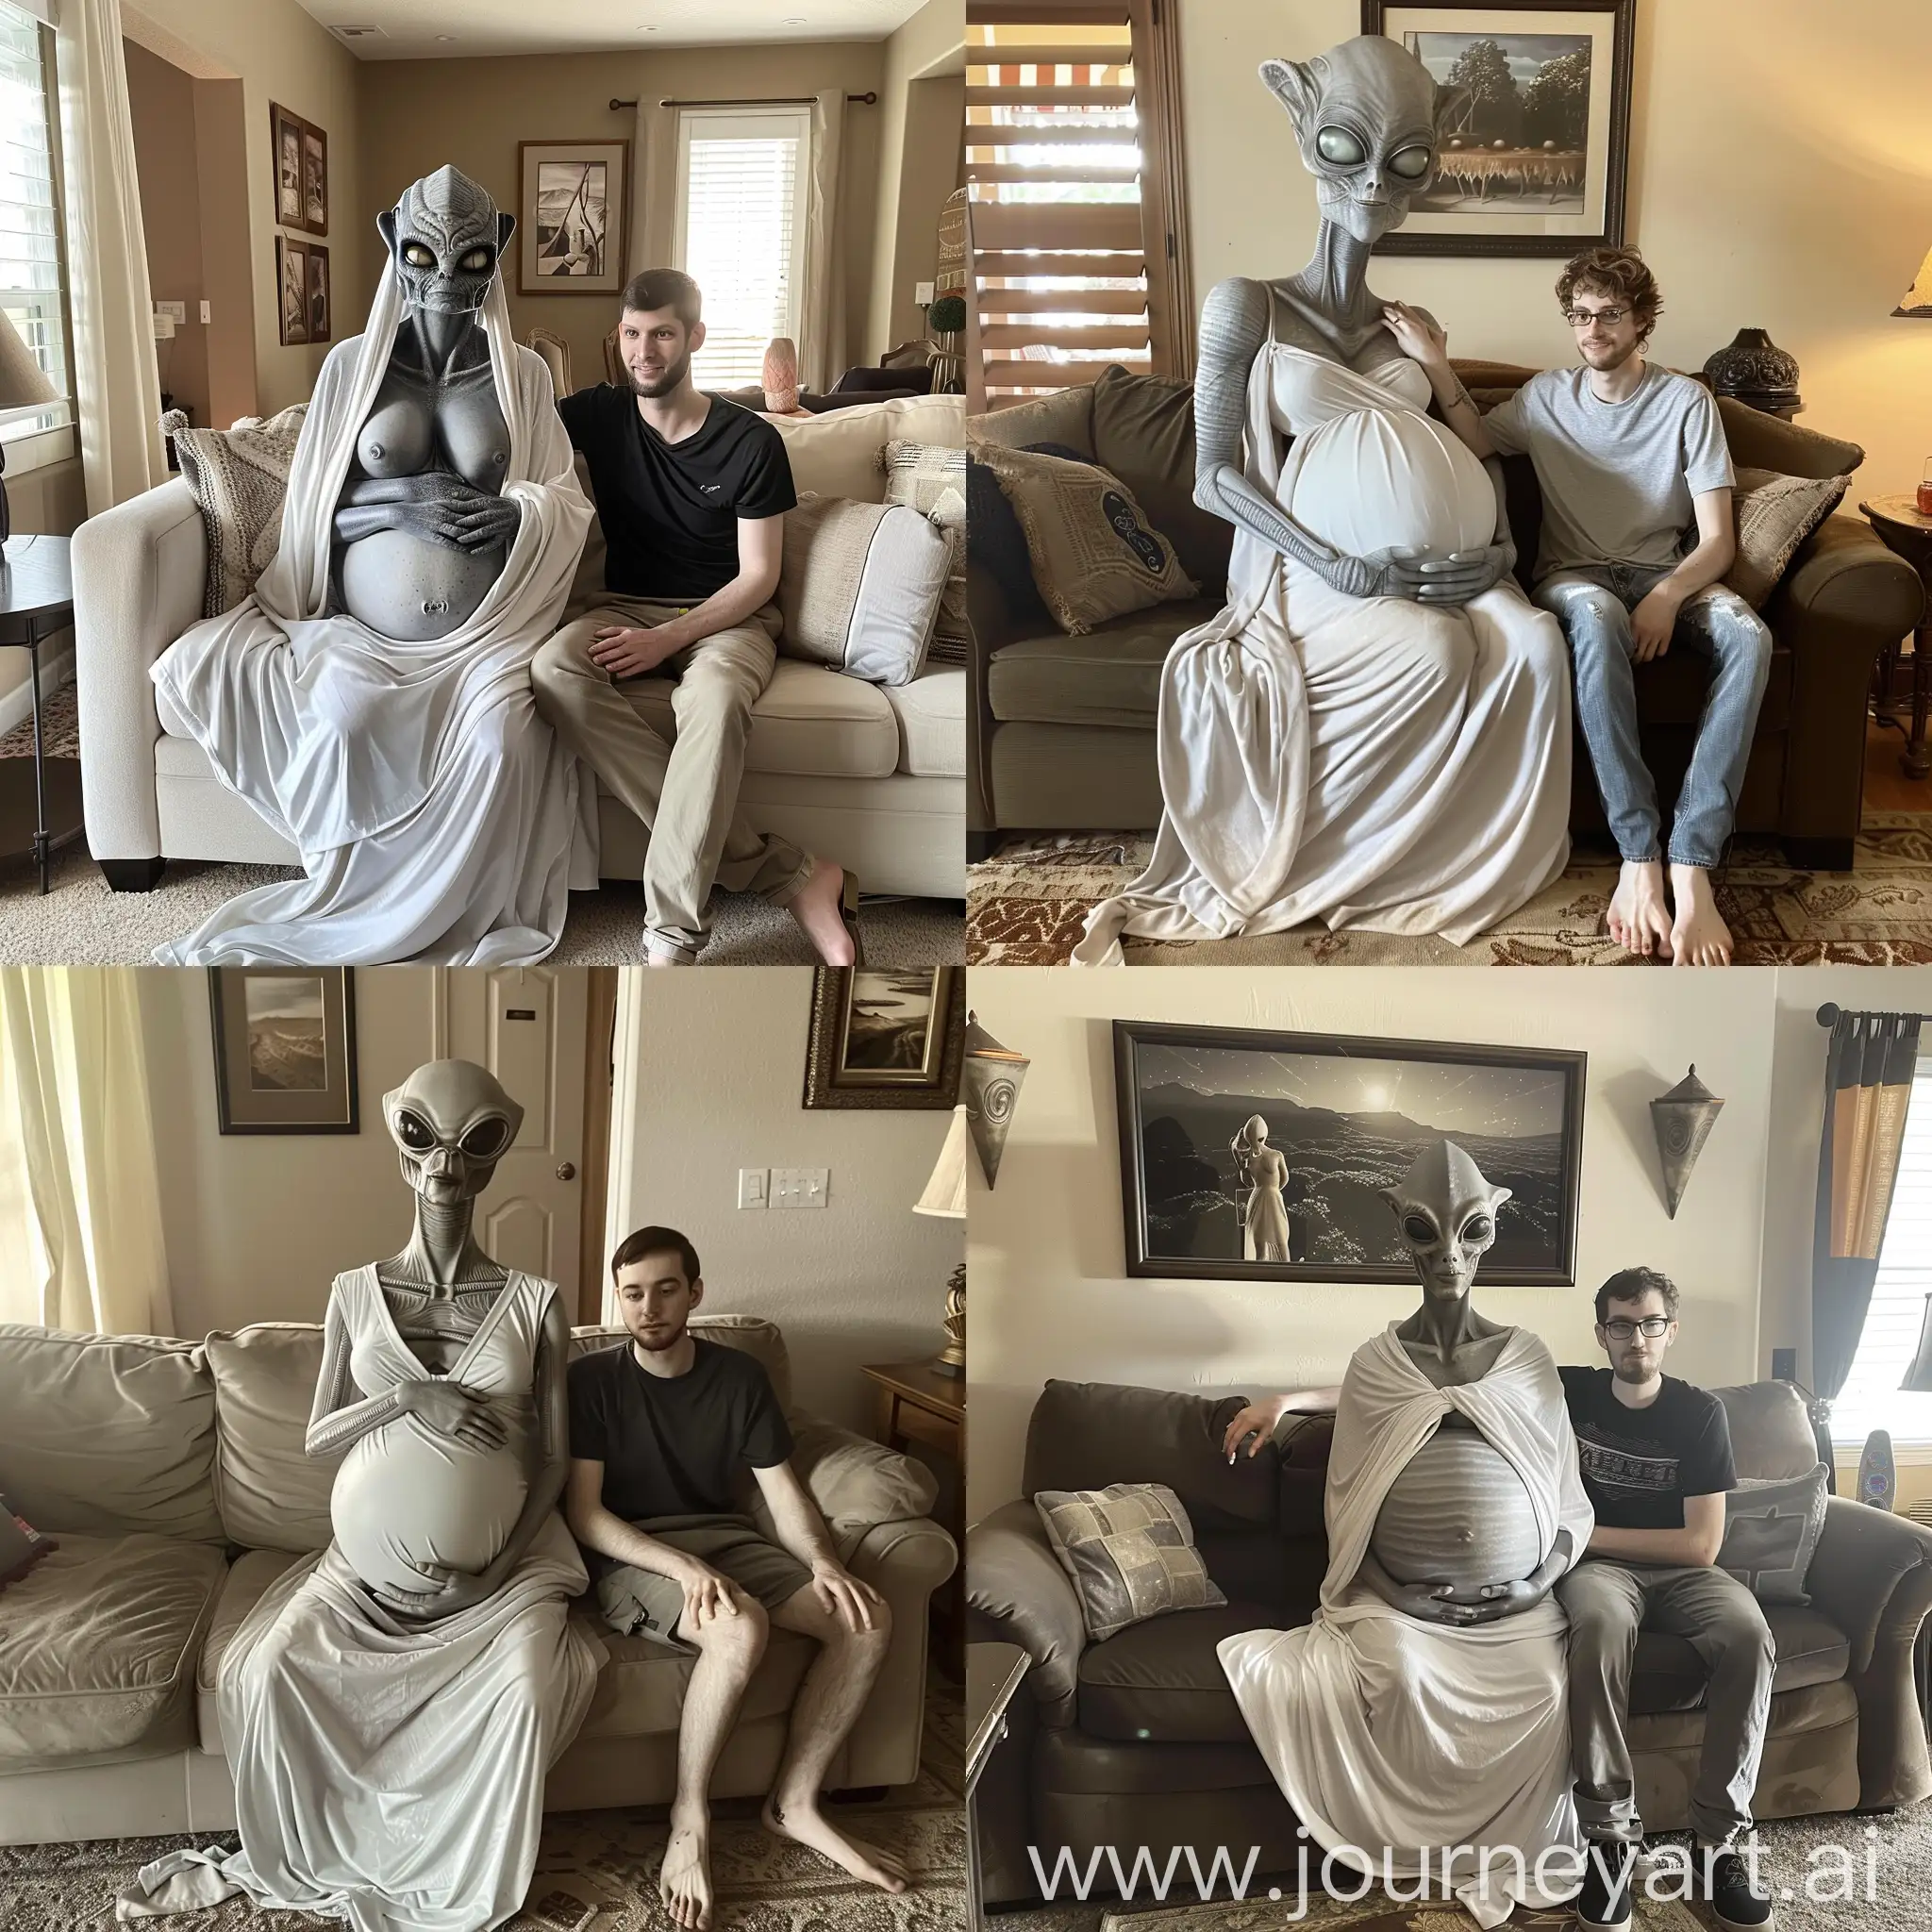 A very pregnant female gray Alien in a white toga, Her pregnant tummy is very large. The alien is pregnant with Triplets. 6'11" in height. She is sitting on your couch in your living room. A 26 year old Human Male named Matt (5'11" in height) is sitting next to her, Taking care of her. The Alien has her arm wrapped around Matt in a sweet loving and thankful gesture.